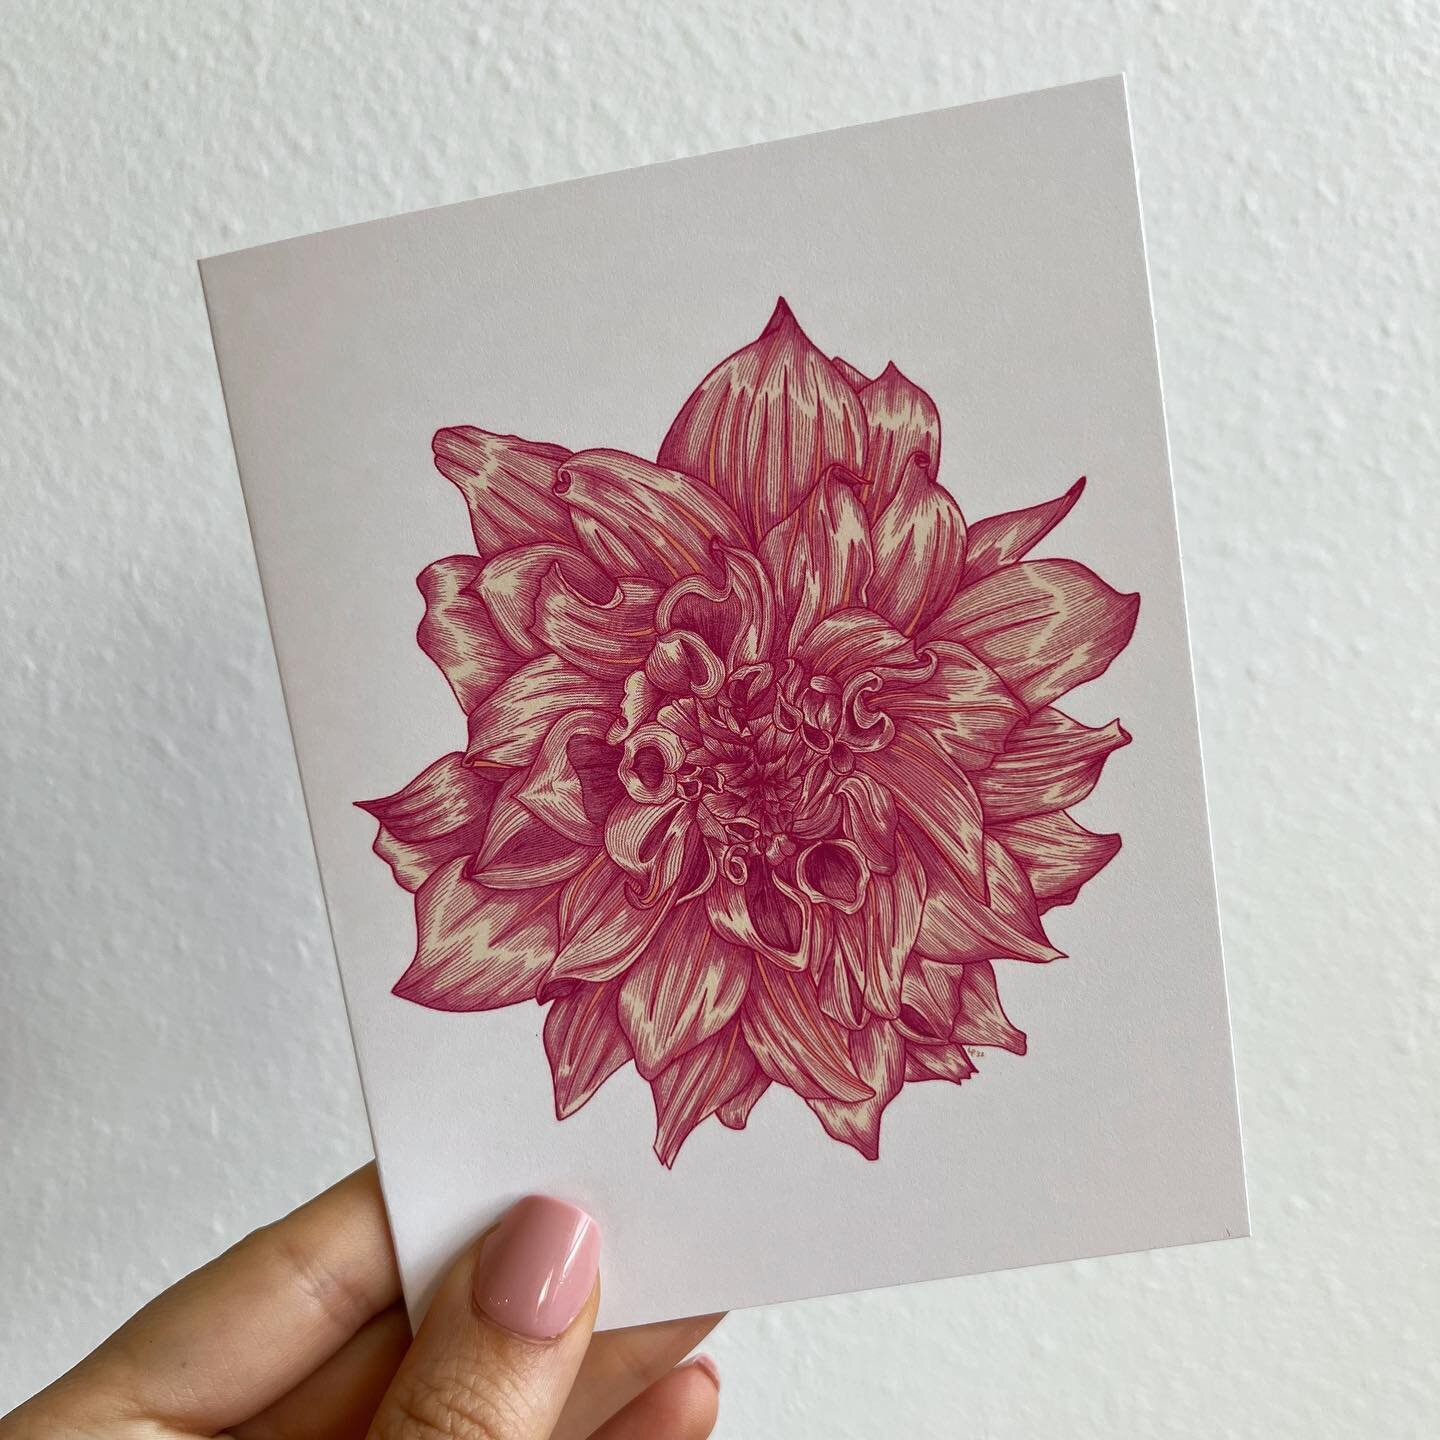 Hey, lookit! 👀 

Got in the first batch of these QT notecards -coming soon to link in bio. Get your pens and your addy book ready to send out some snail mail! 📝

#makegoodforgood #seattleart #notecards #artforgood #artprints